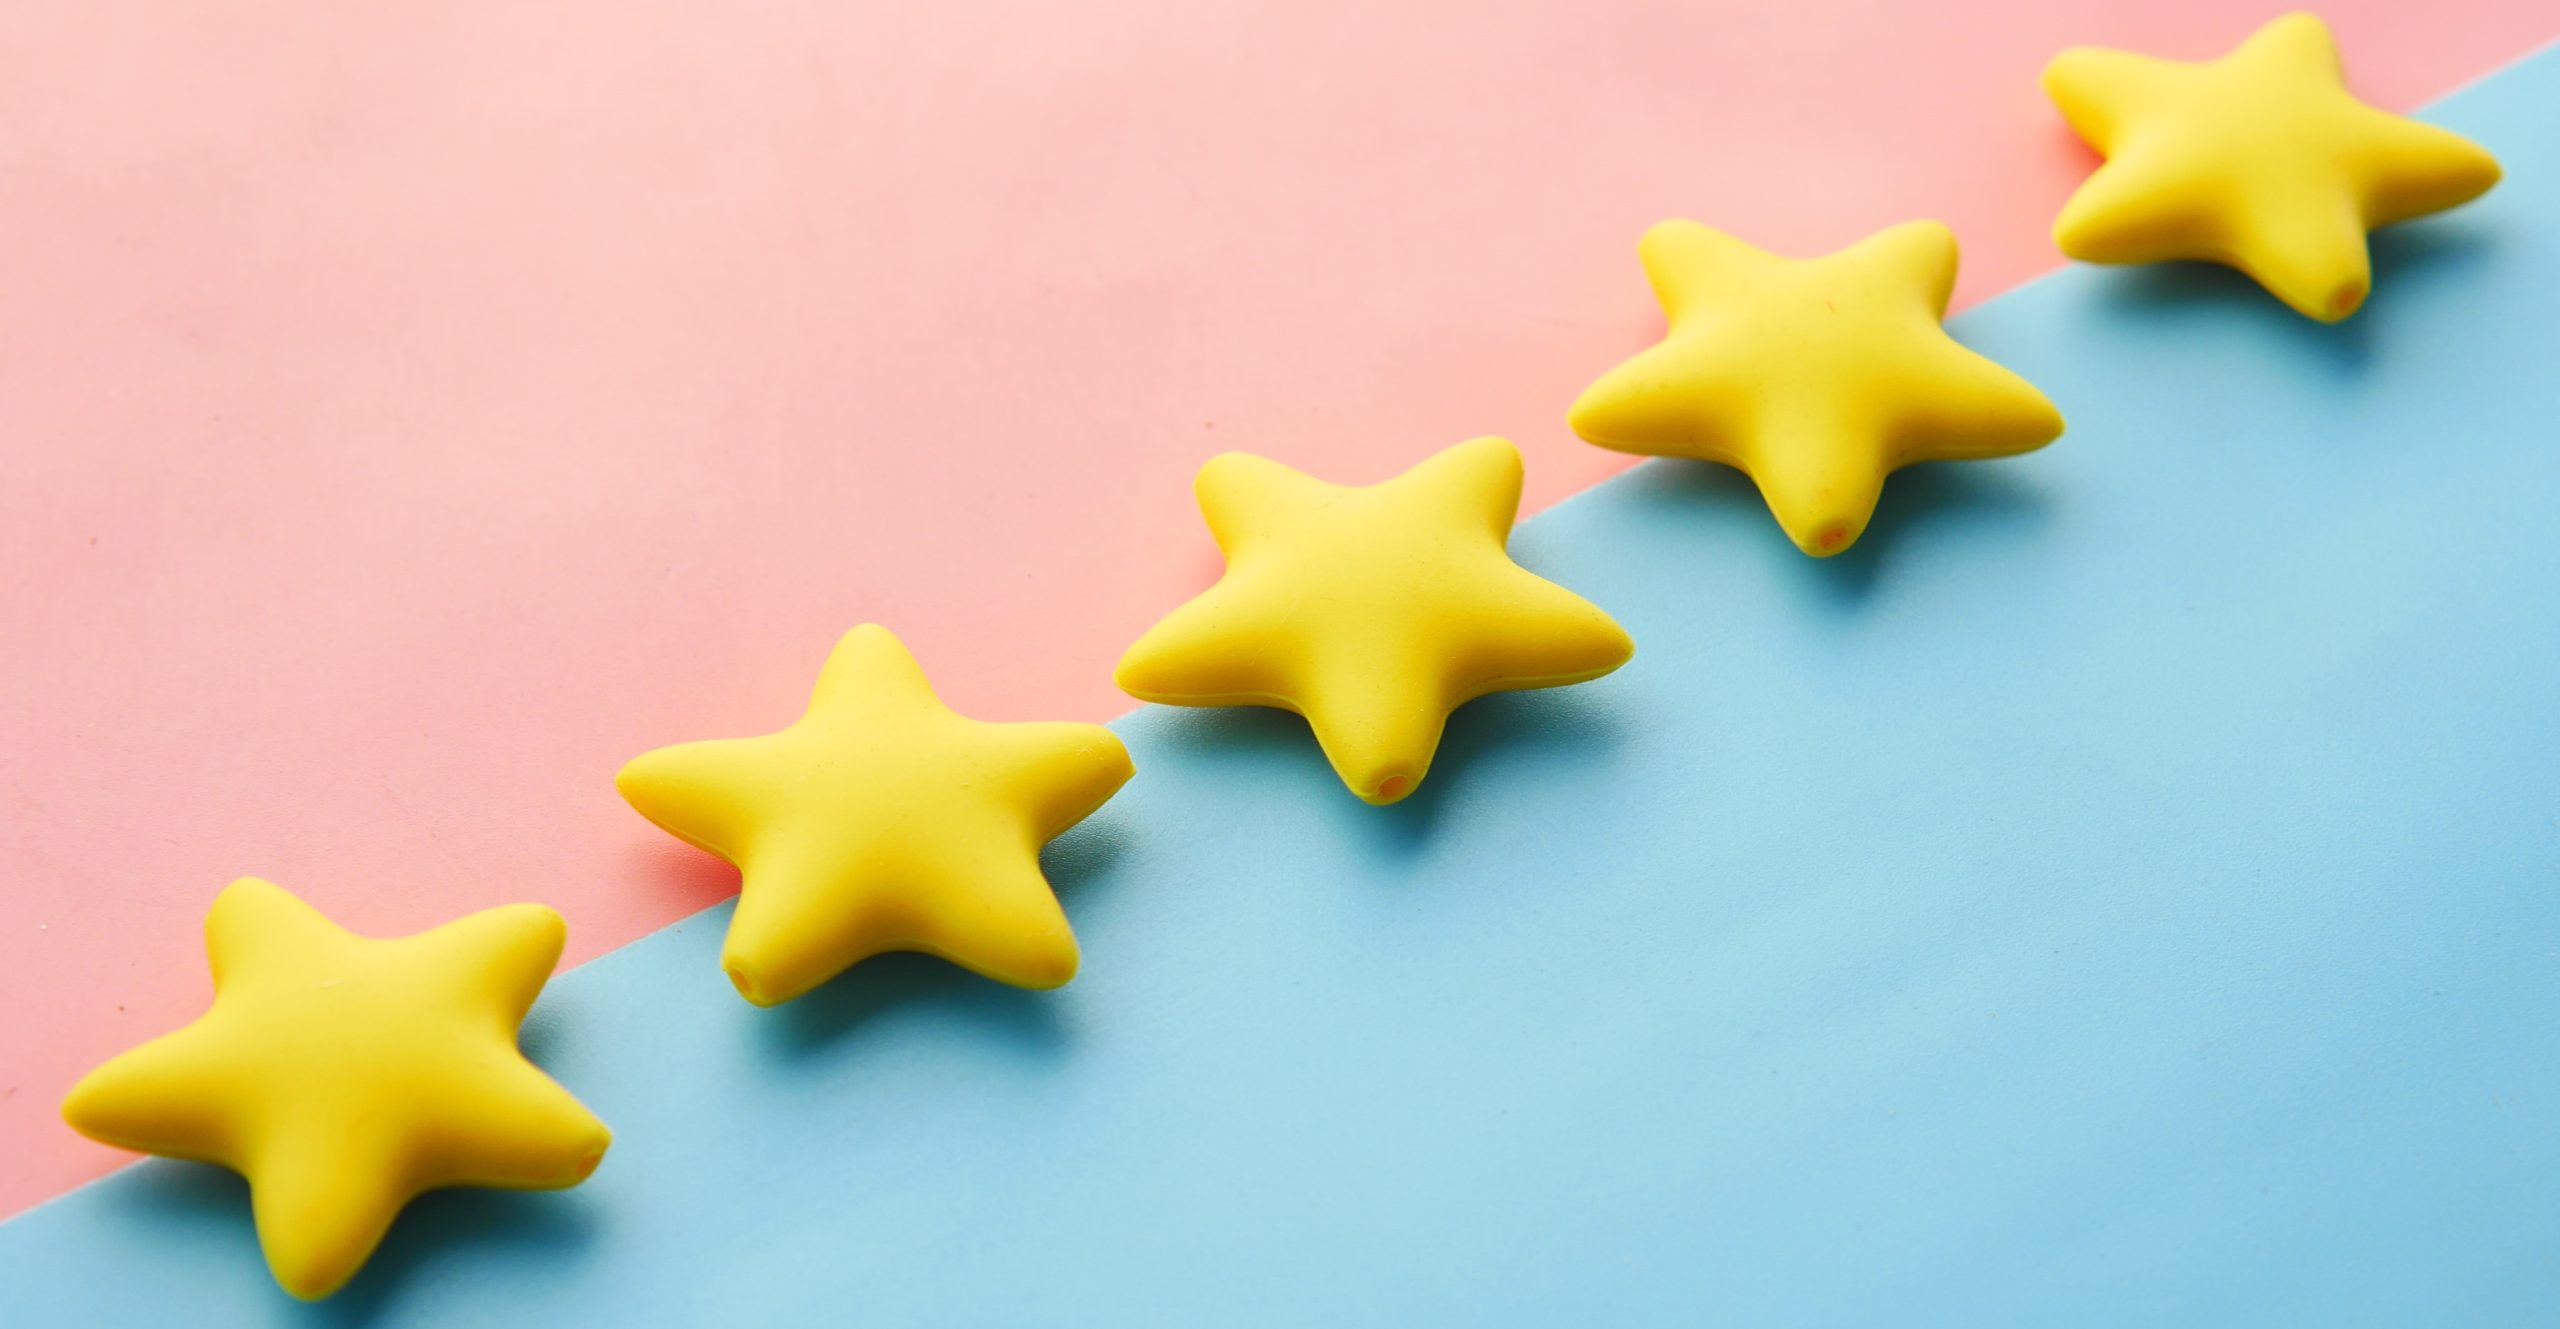 Five yellow stars lined up against a pink and blue background.